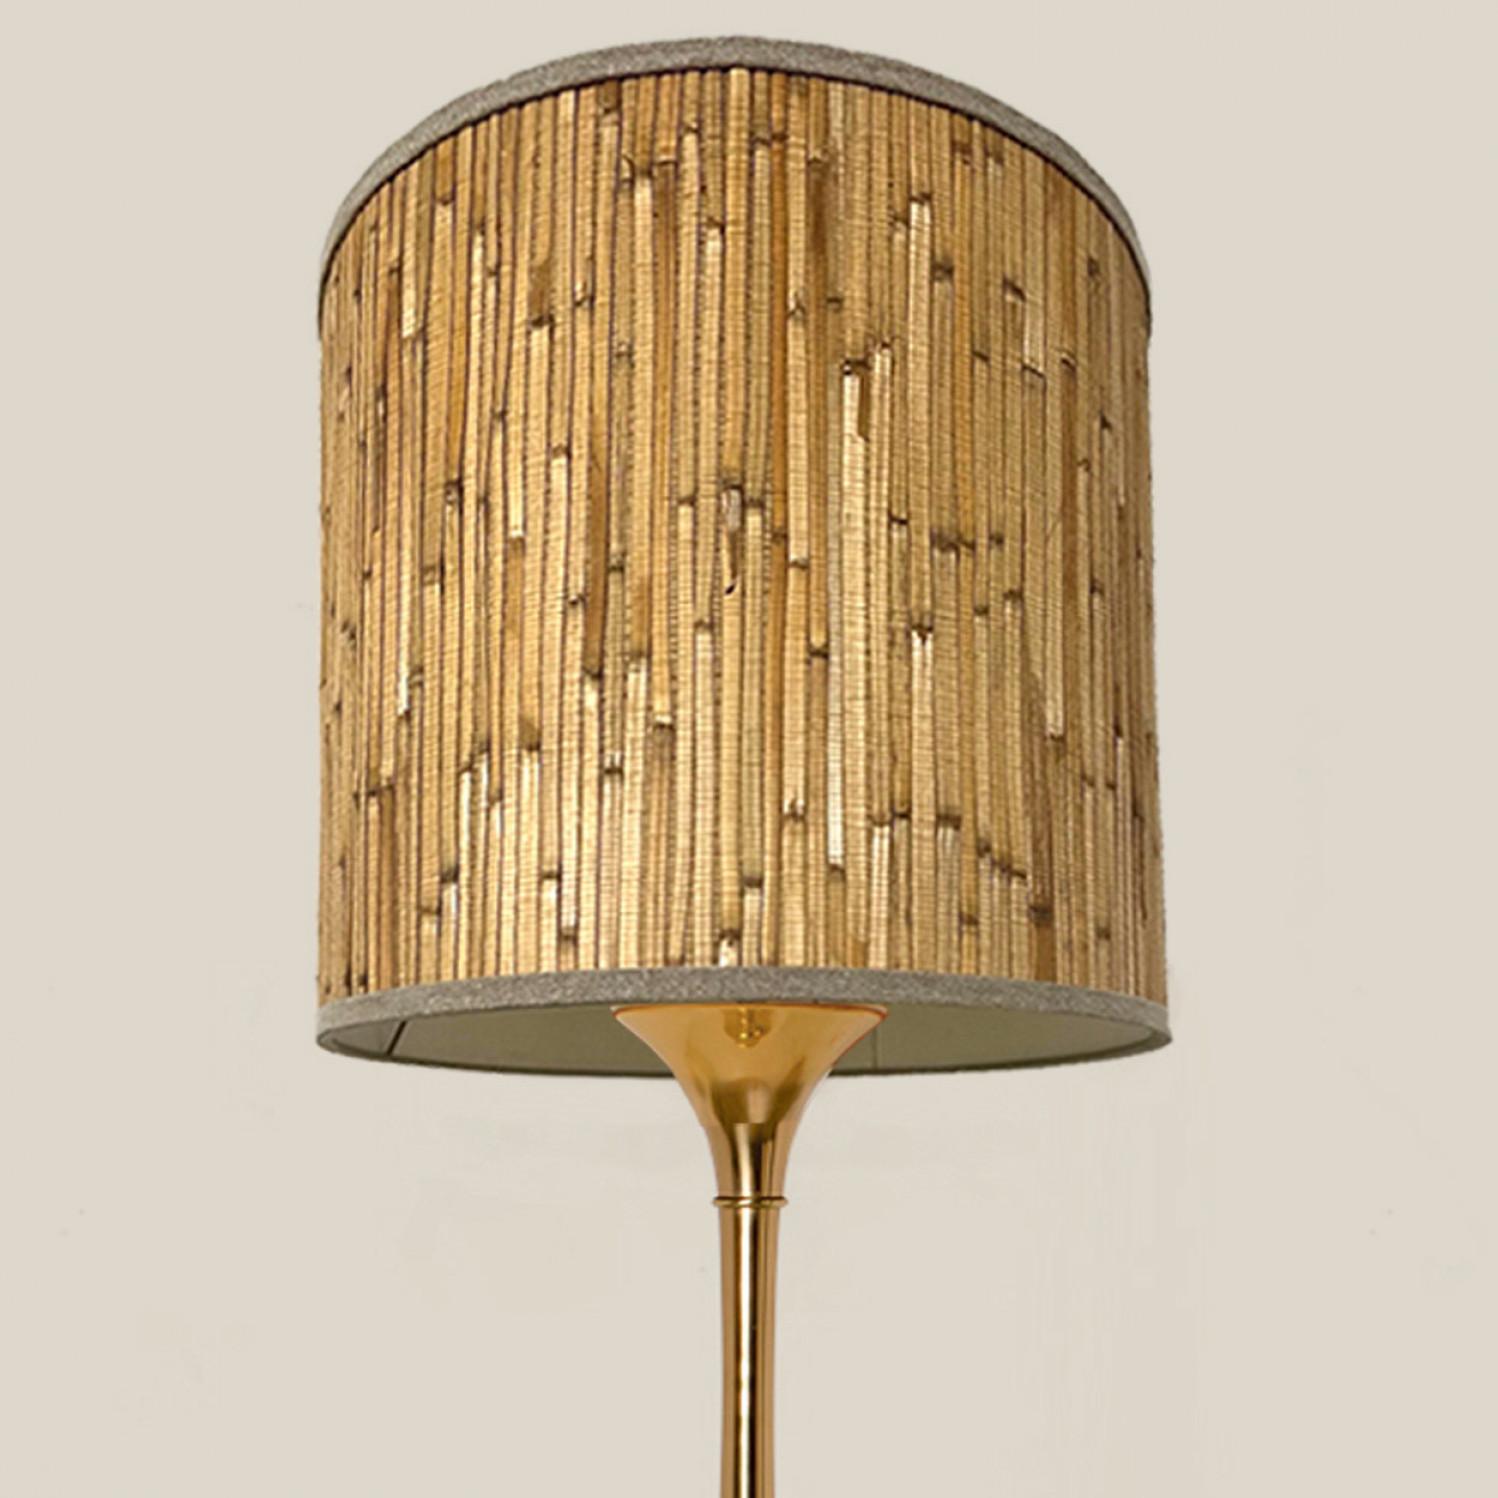 Mid-Century Modern Pair of Table Lamps Gold Brass and Bamboo Shade by Ingo Maurer, Germany, 1968 For Sale